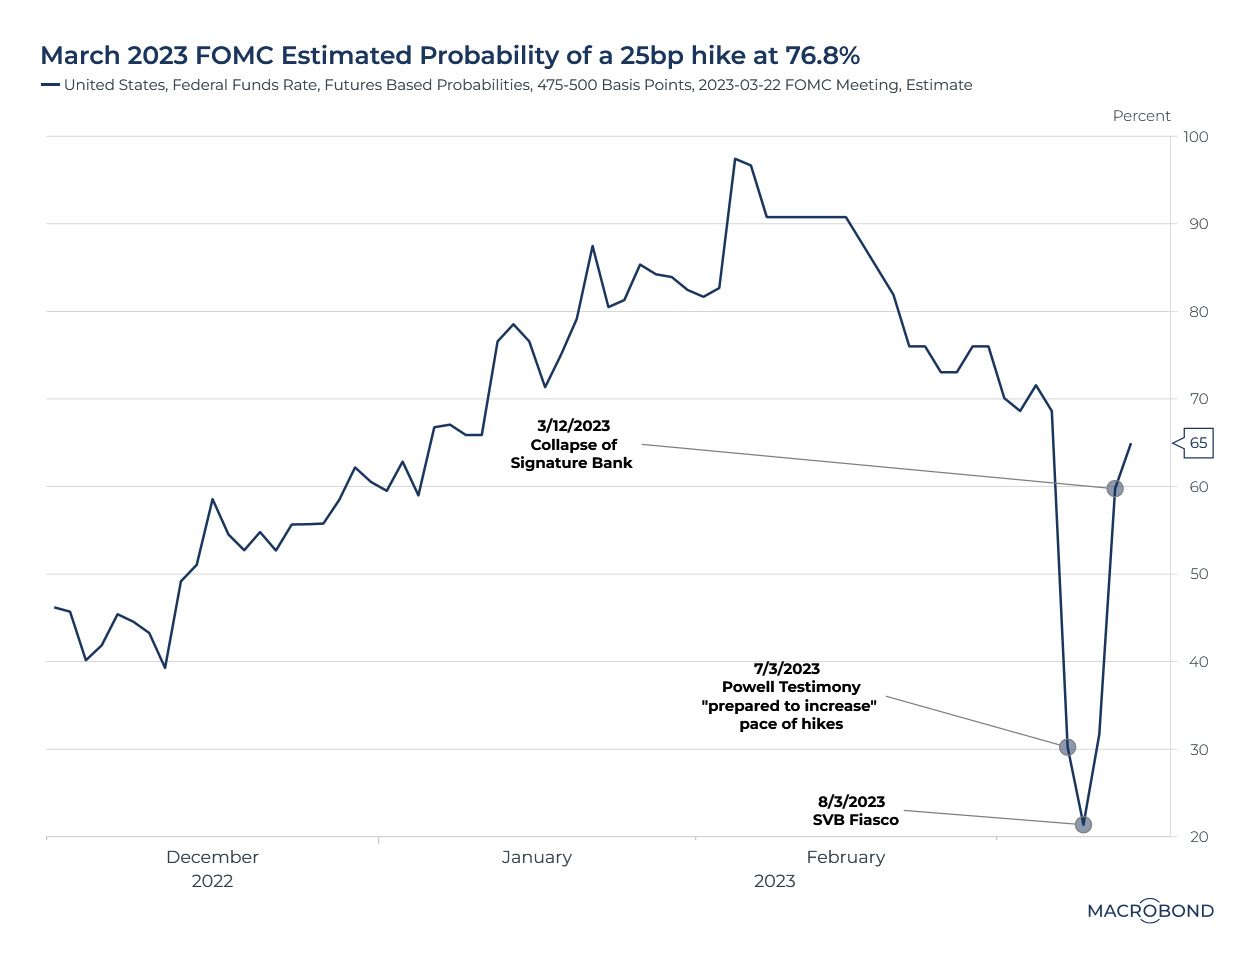 A timeline of SVB’s Collapse against FOMC Estimated Probability of a 25bp hike